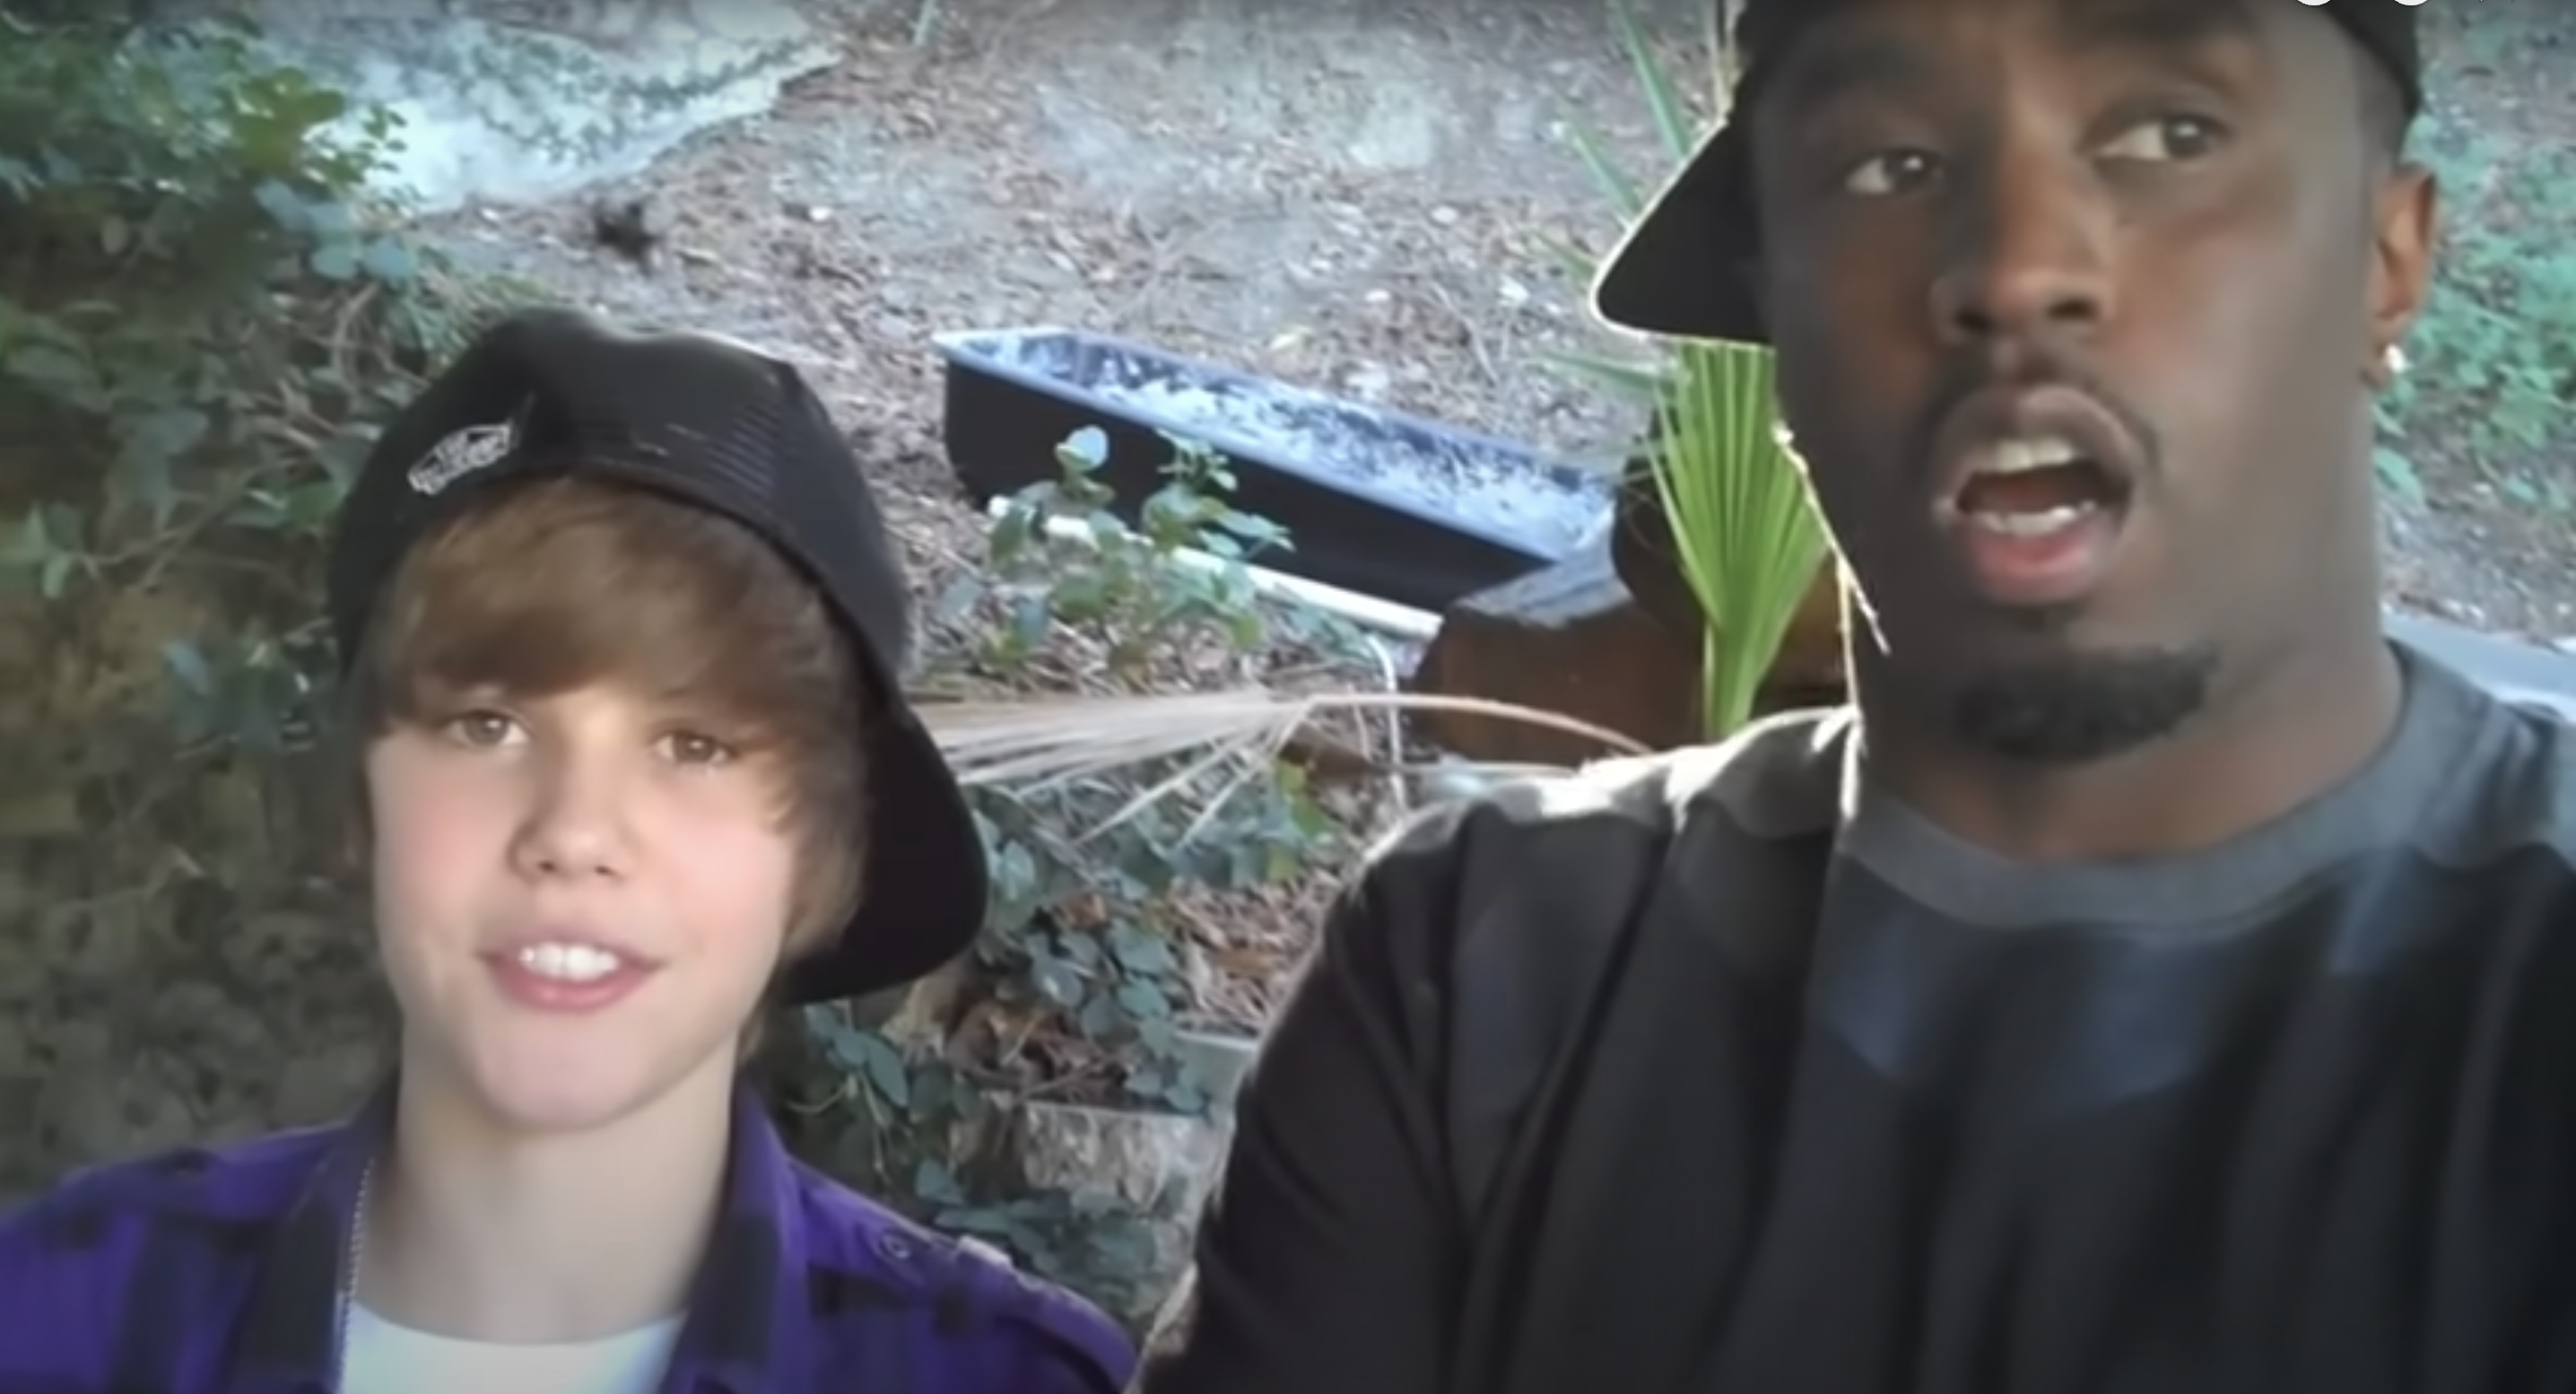 ‘Disturbing’ Footage Of Diddy And Young Justin Bieber Resurfaces Amidst Abuse Allegations